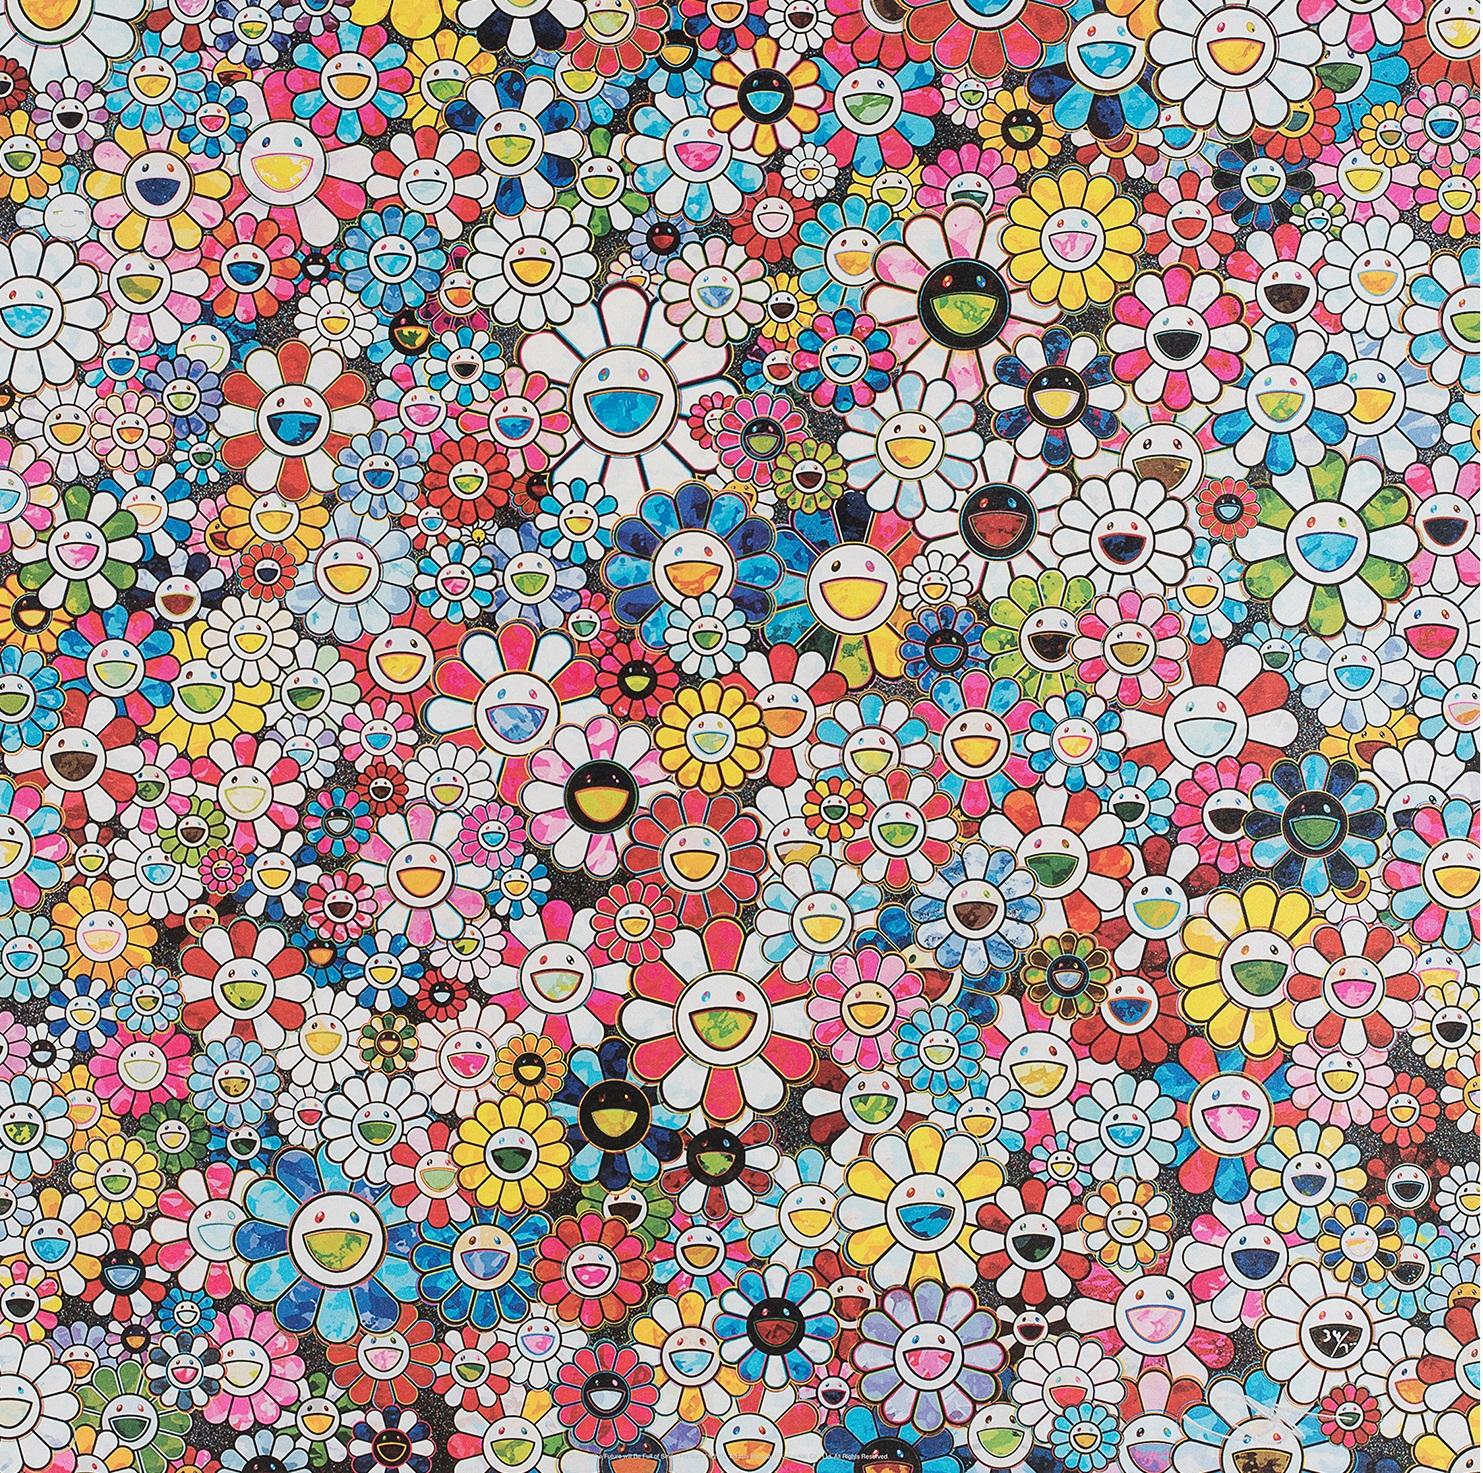 Takashi Murakami Figurative Print - The Future will Be Full of Smile! For Sure!. Limited Edition (print) by Murakami